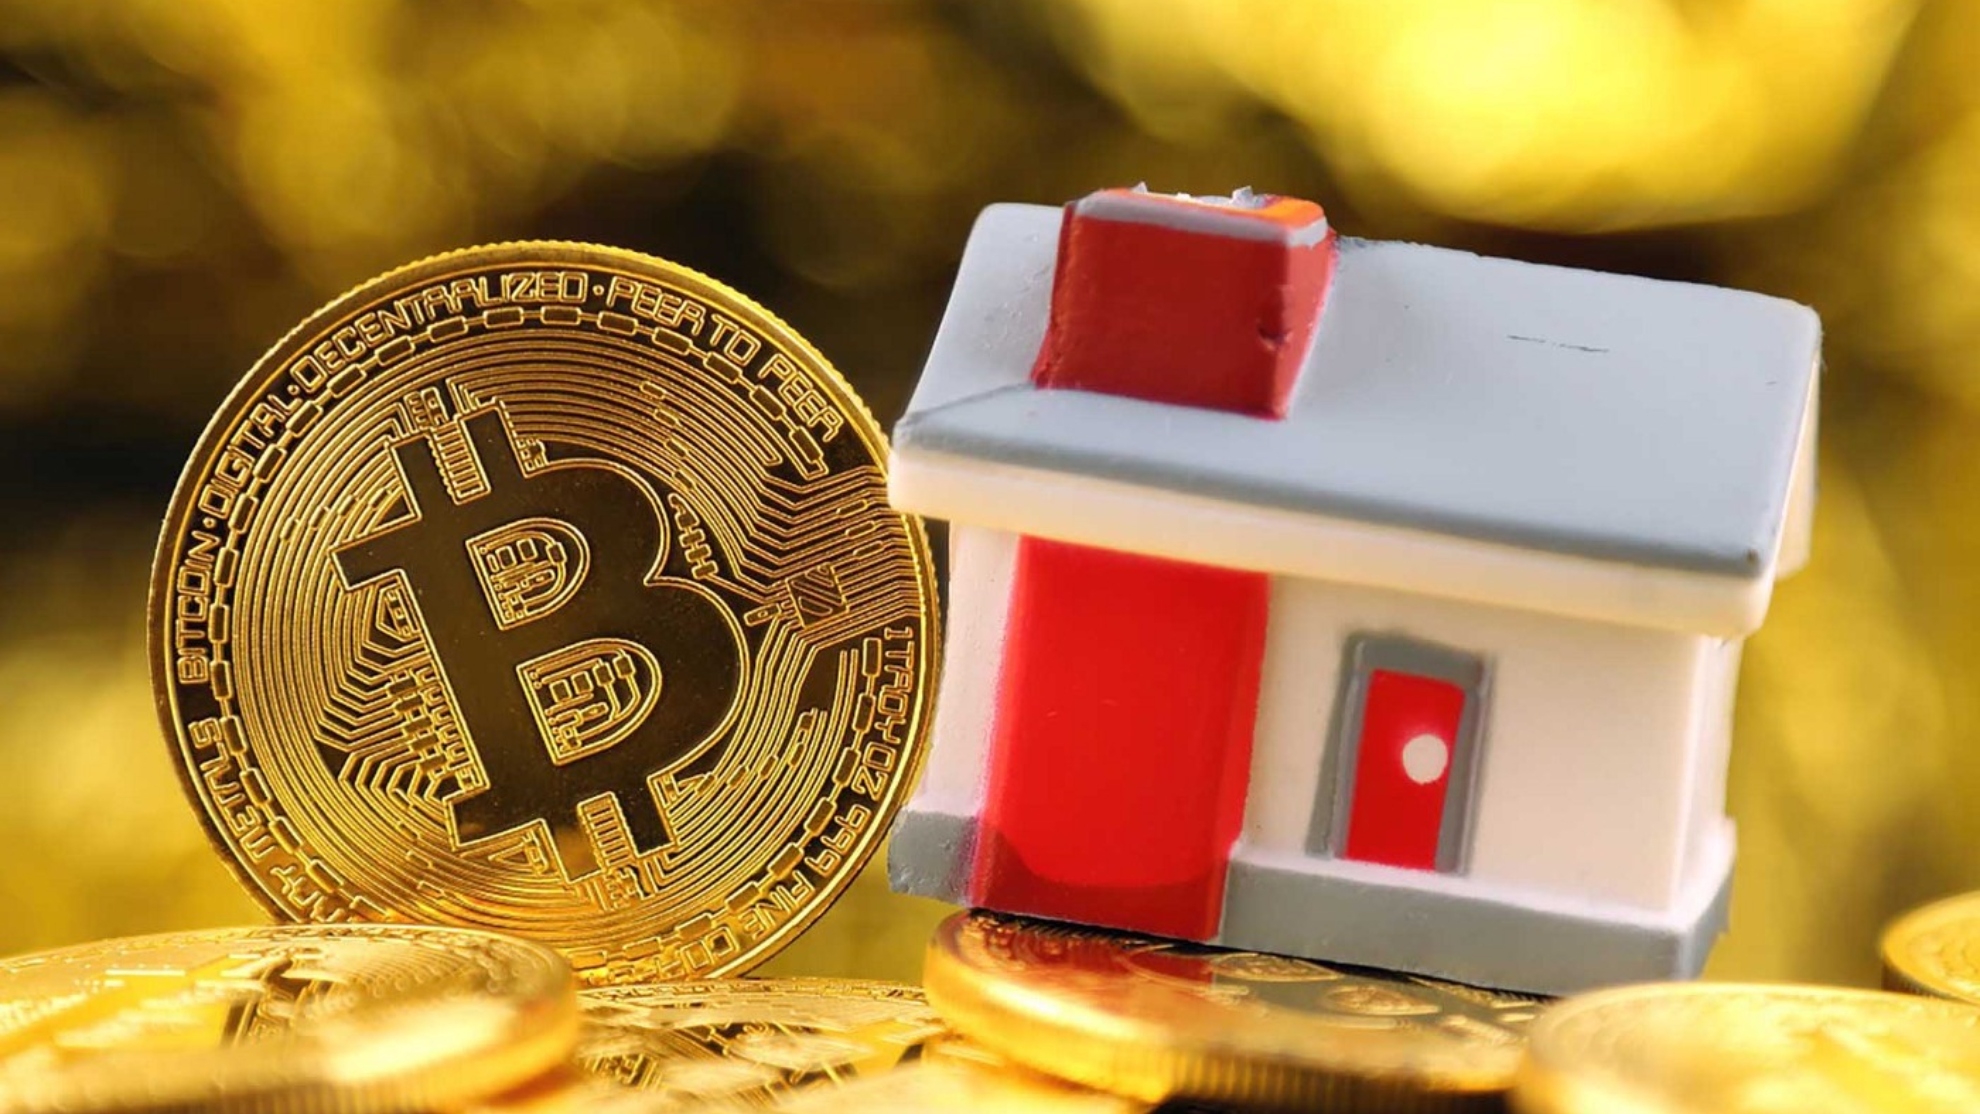 Bitcoin And Real Estate: Can You Buy Real Estate With Bitcoin Investments?